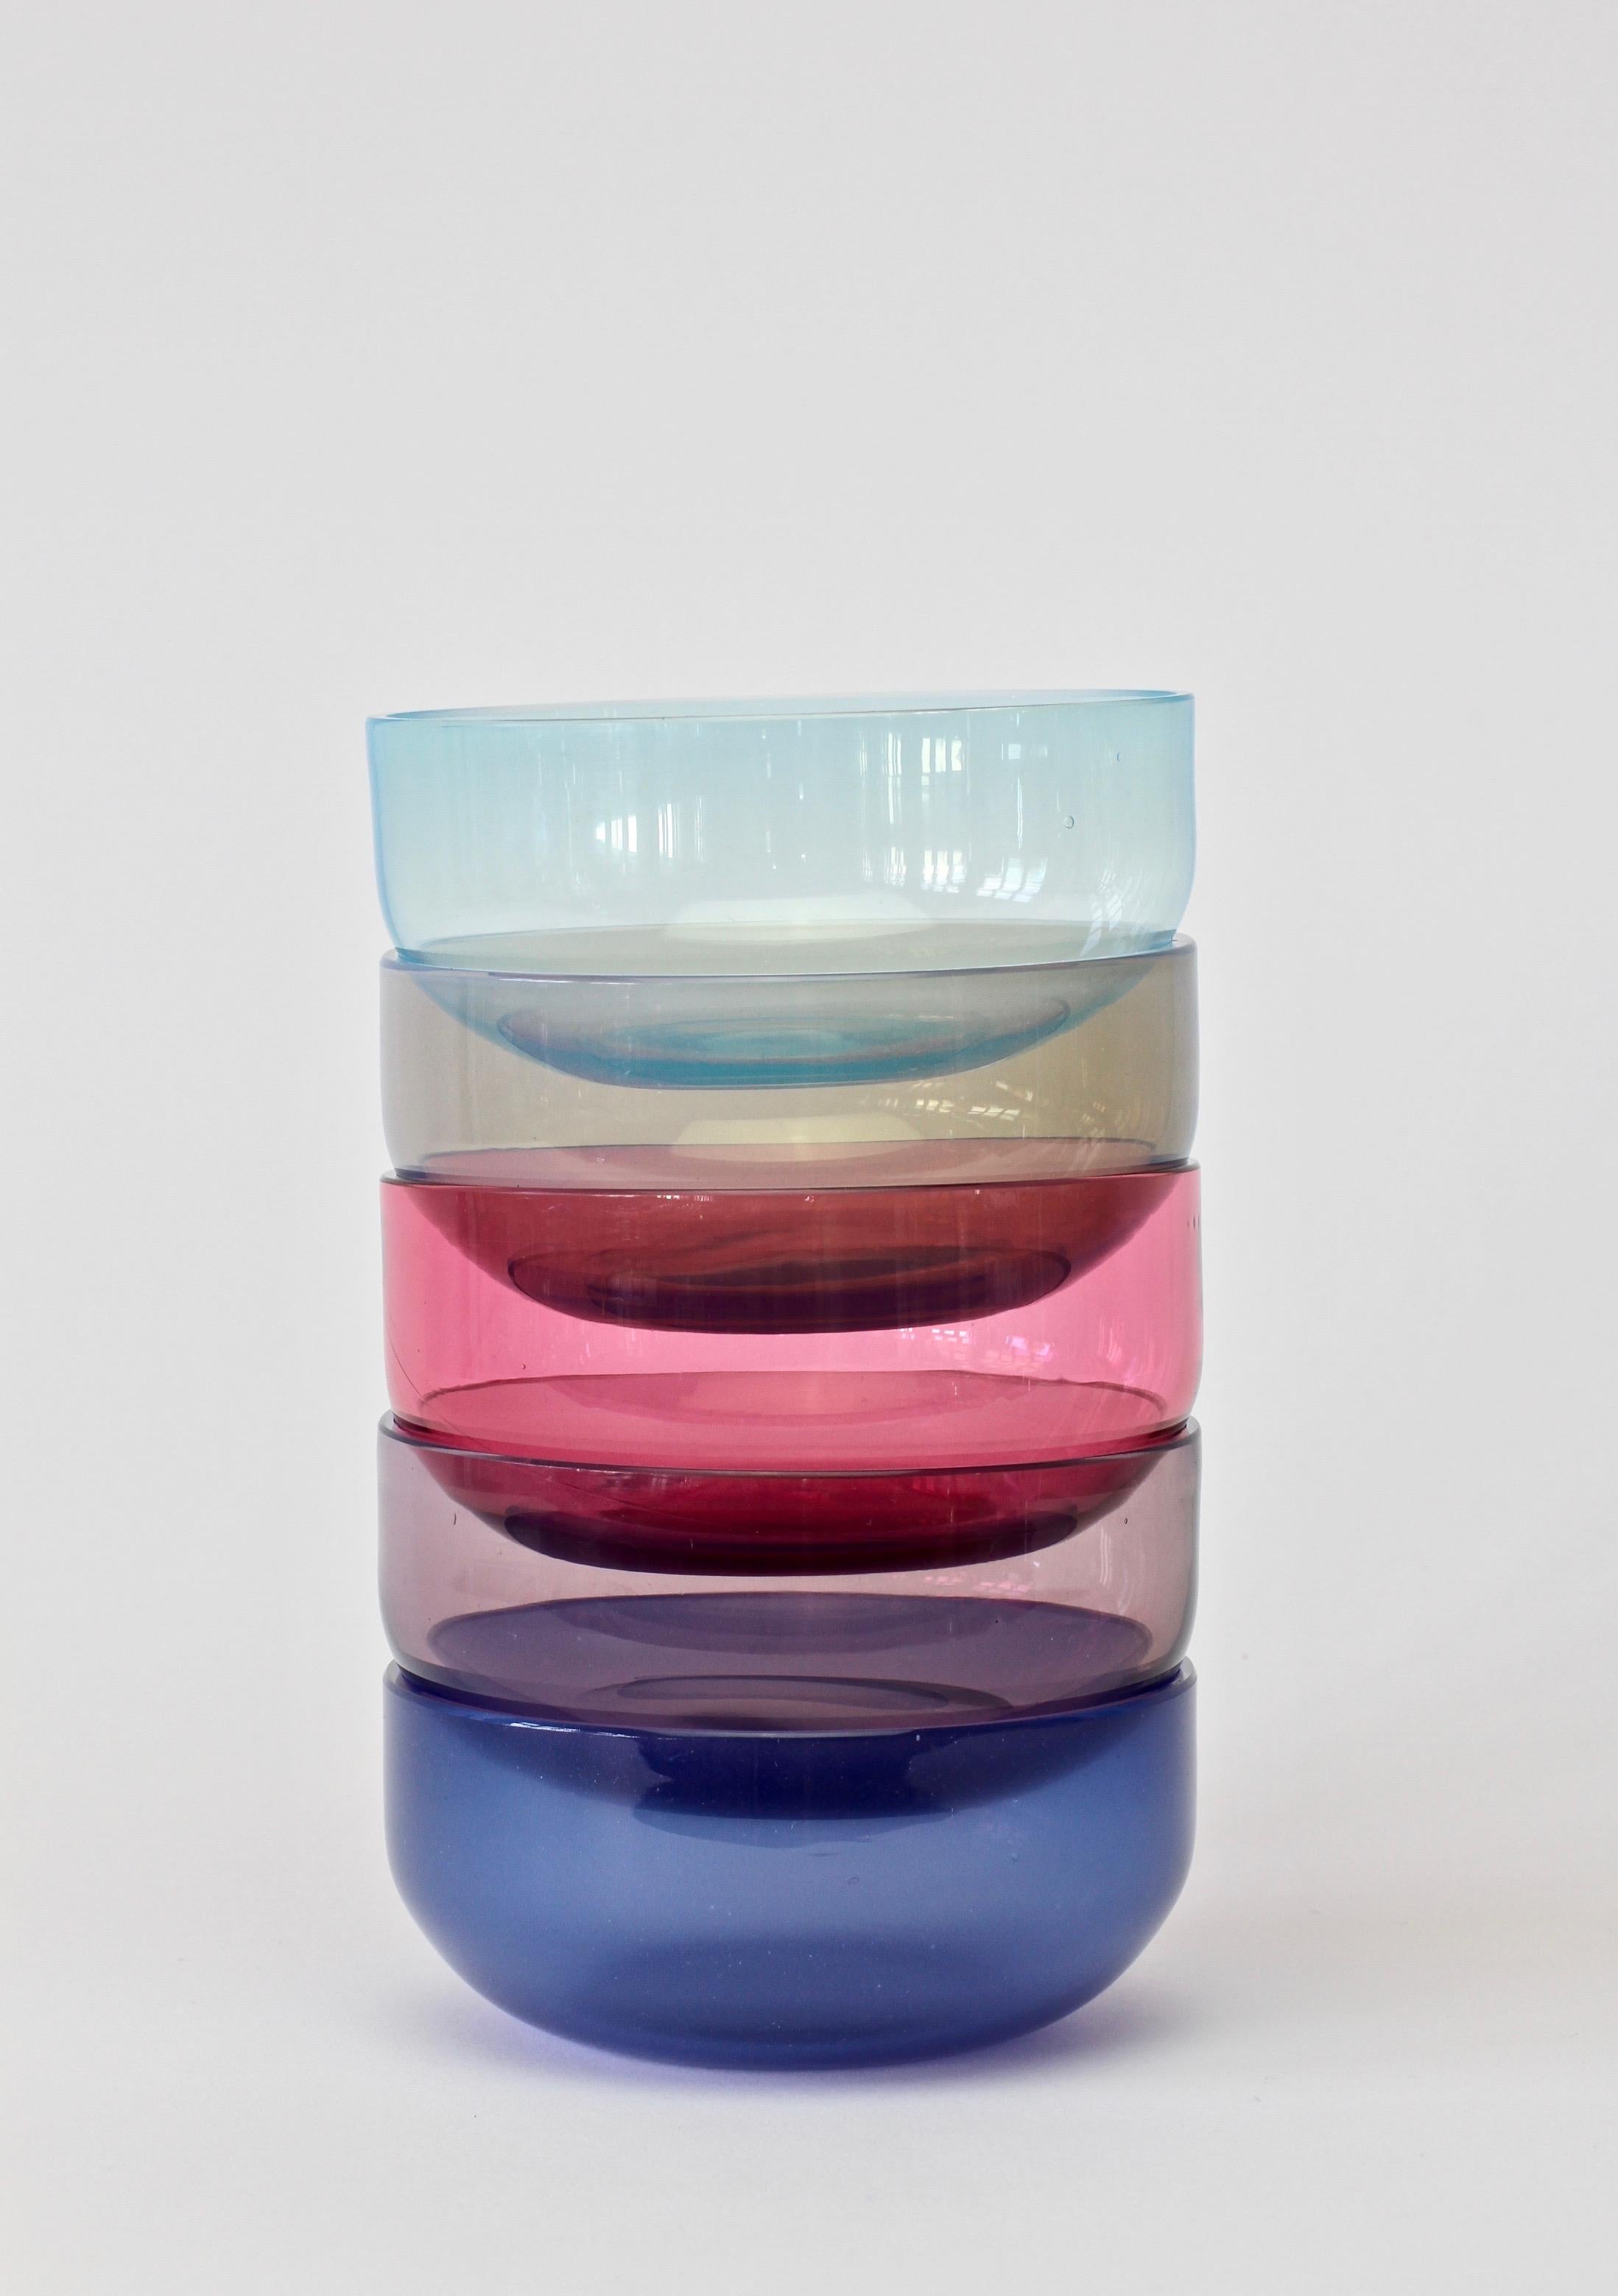 Antonio da Ros for Cenedese Murano Glass Set of Vibrantly Colored Glass Bowls For Sale 2